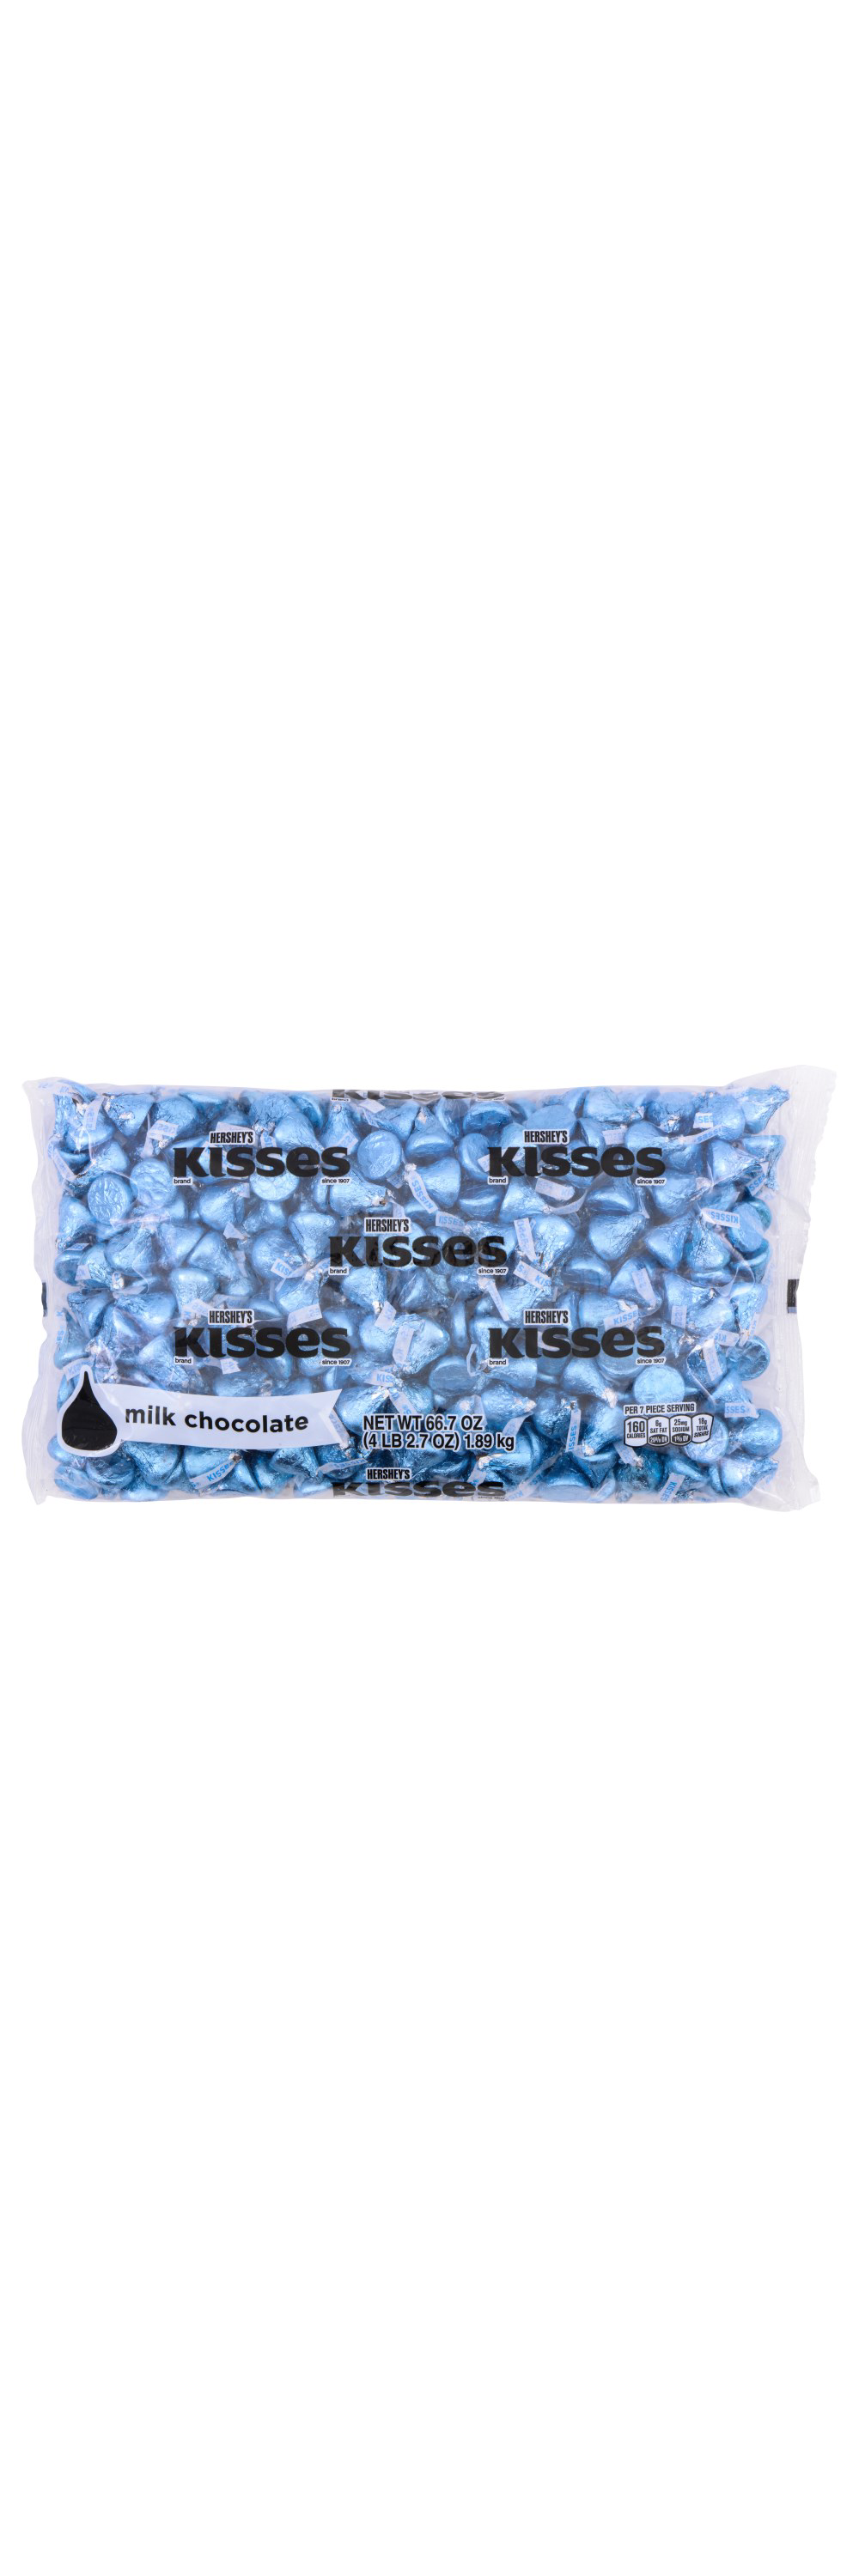 HERSHEY'S KISSES Light Blue Foil Milk Chocolate Candy, 66.7 oz bag - Front of Package